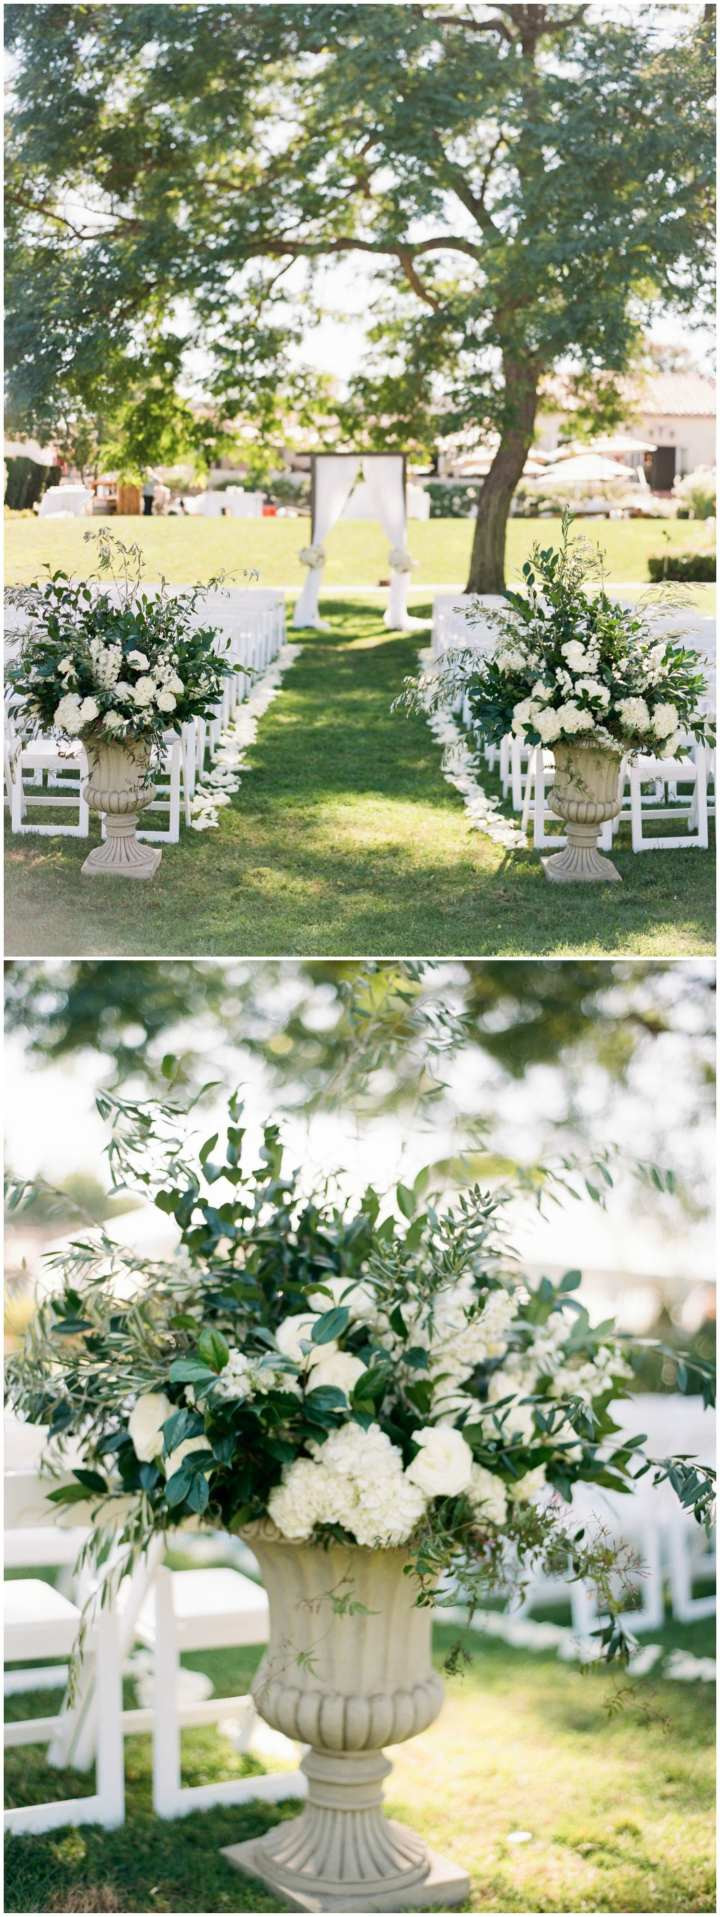 Cheap Wedding Vases Of Outdoor Wedding Ceremony Lovely Vases Disposable Plastic Single with Outdoor Wedding Ceremony Awesome the Smarter Way to Wed Wedding Ceremony Ideas Pinterest Of Outdoor Wedding